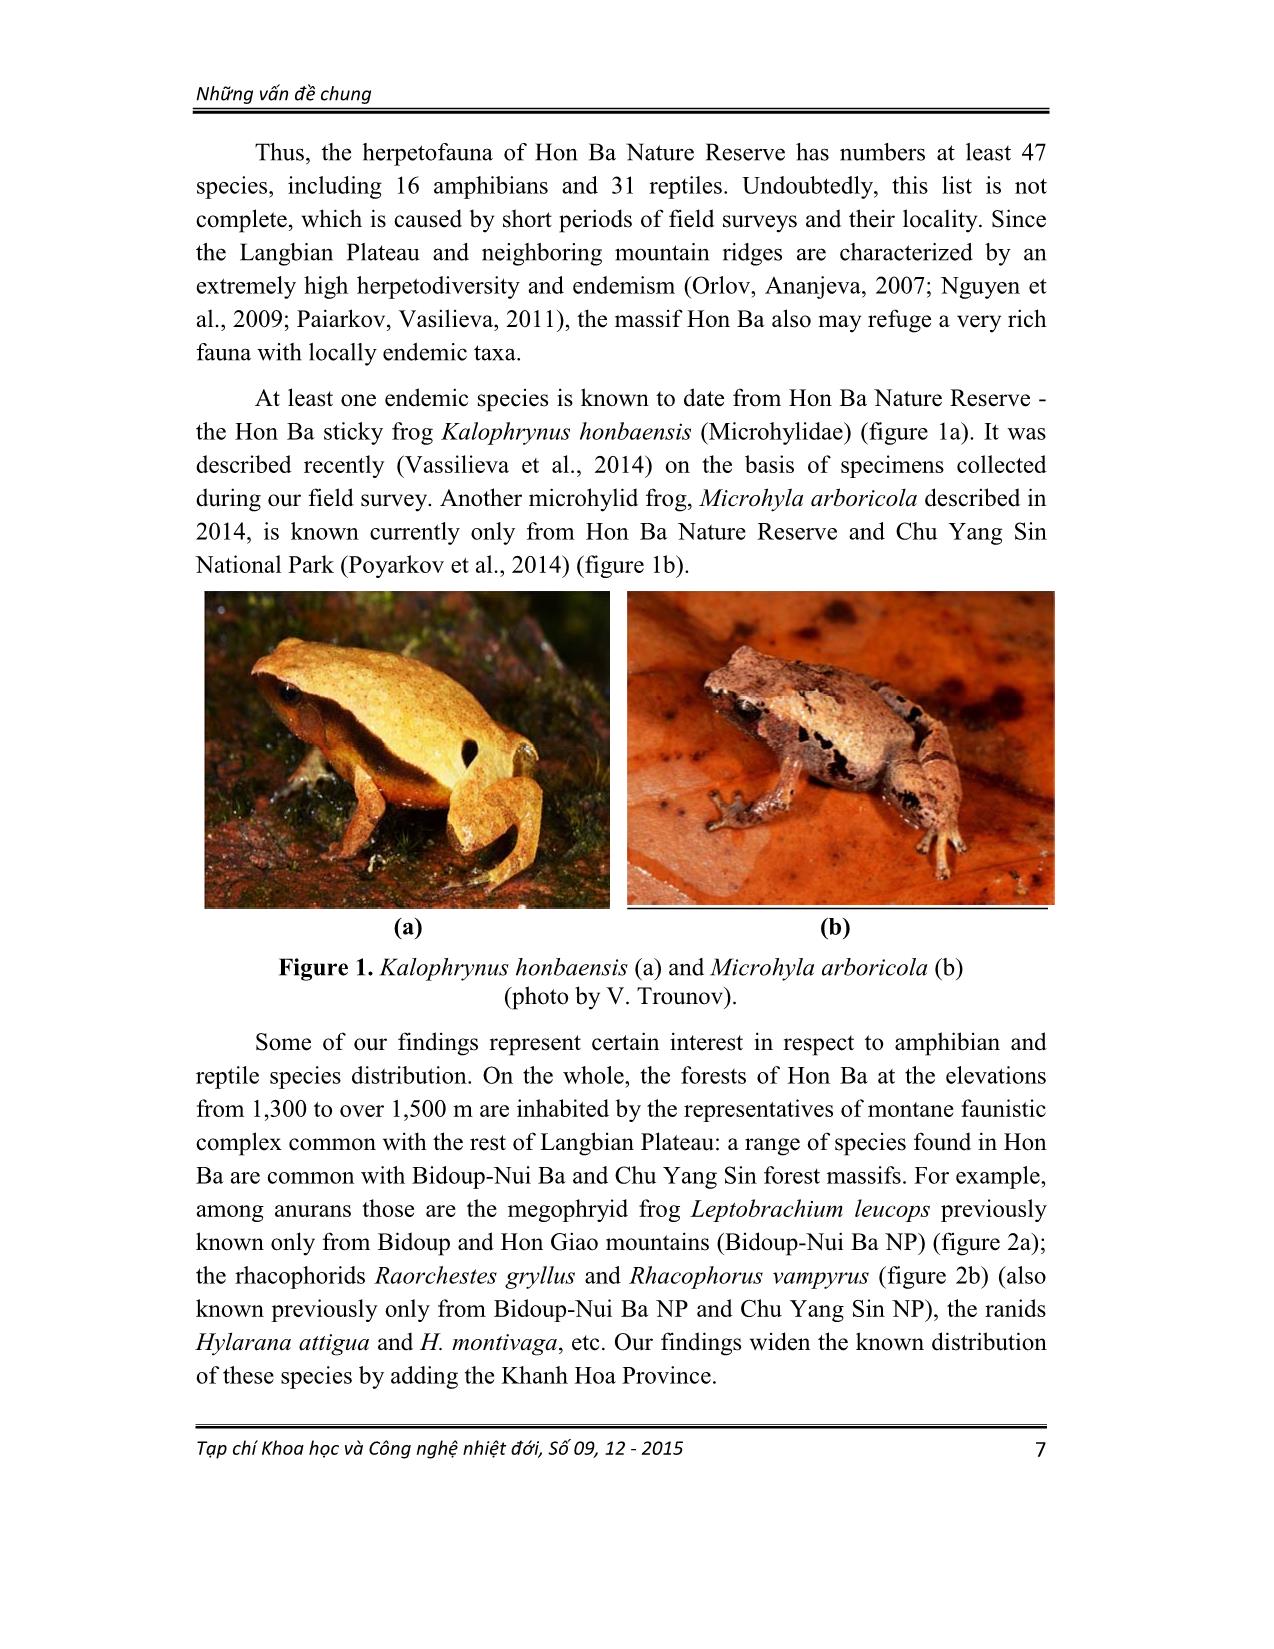 Contribution to the fauna of langbian plateau, Southern Vietnam: Amphibians and reptiles of Hon Ba nature reserve (Khanh Hoa province) trang 5